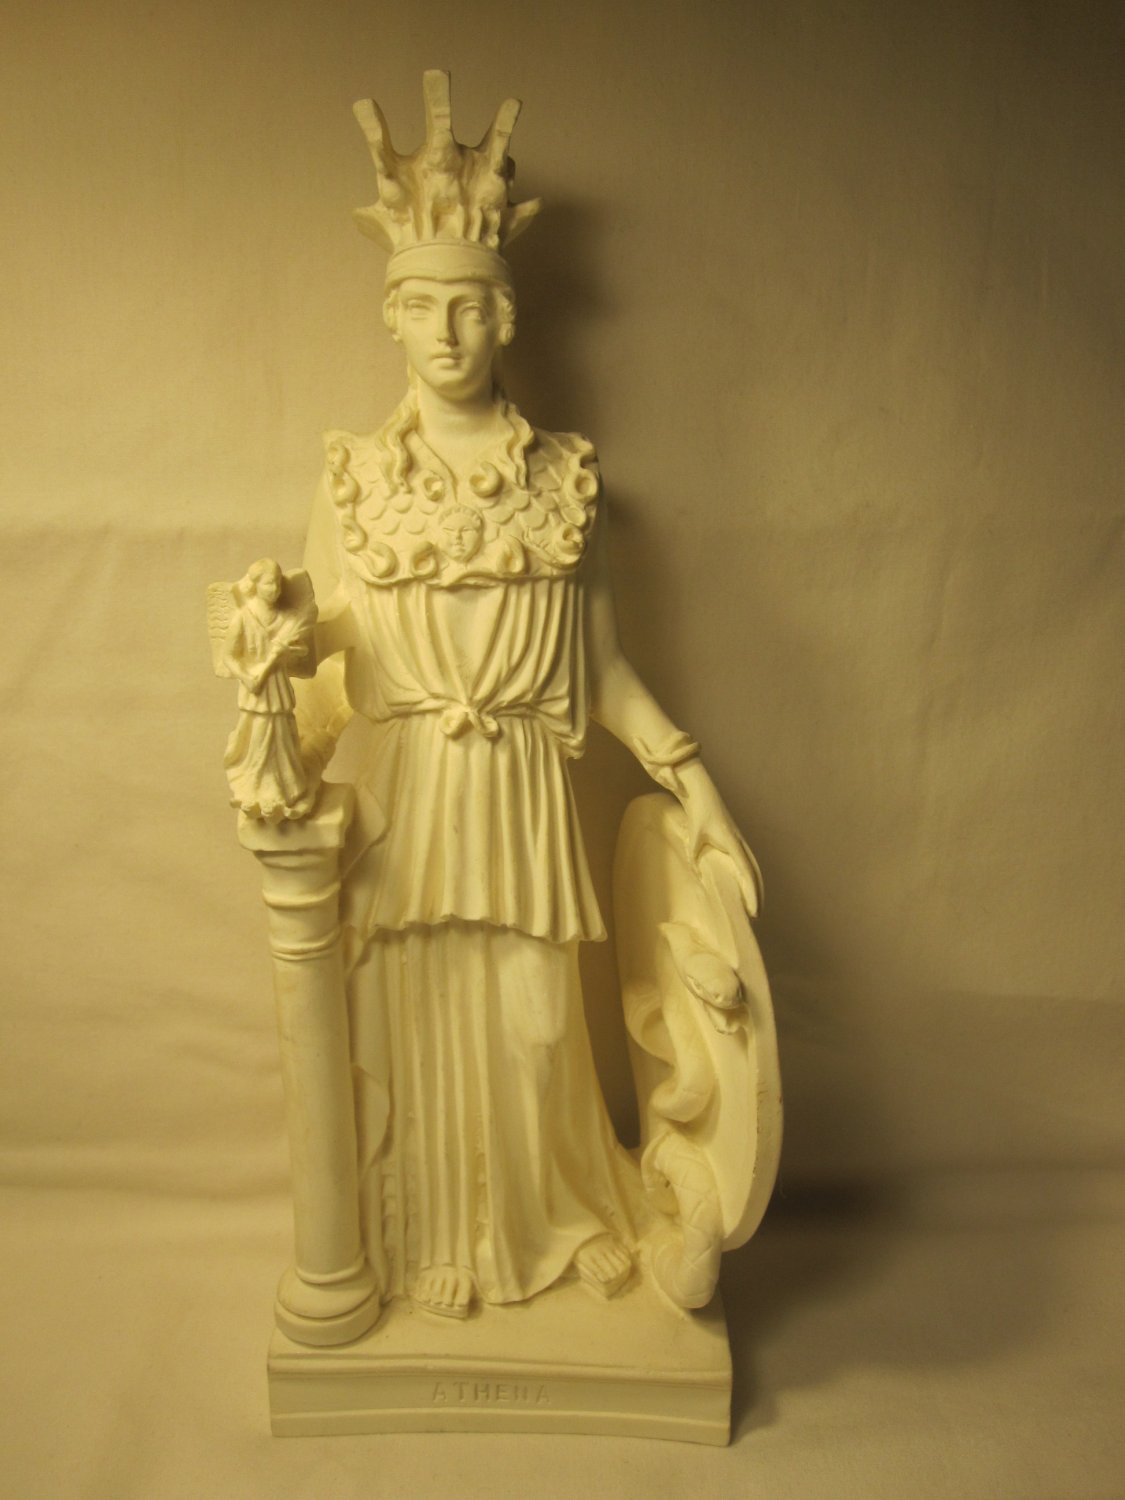 old 10" tall White Statue of Athena - Snake Shield, very detailed